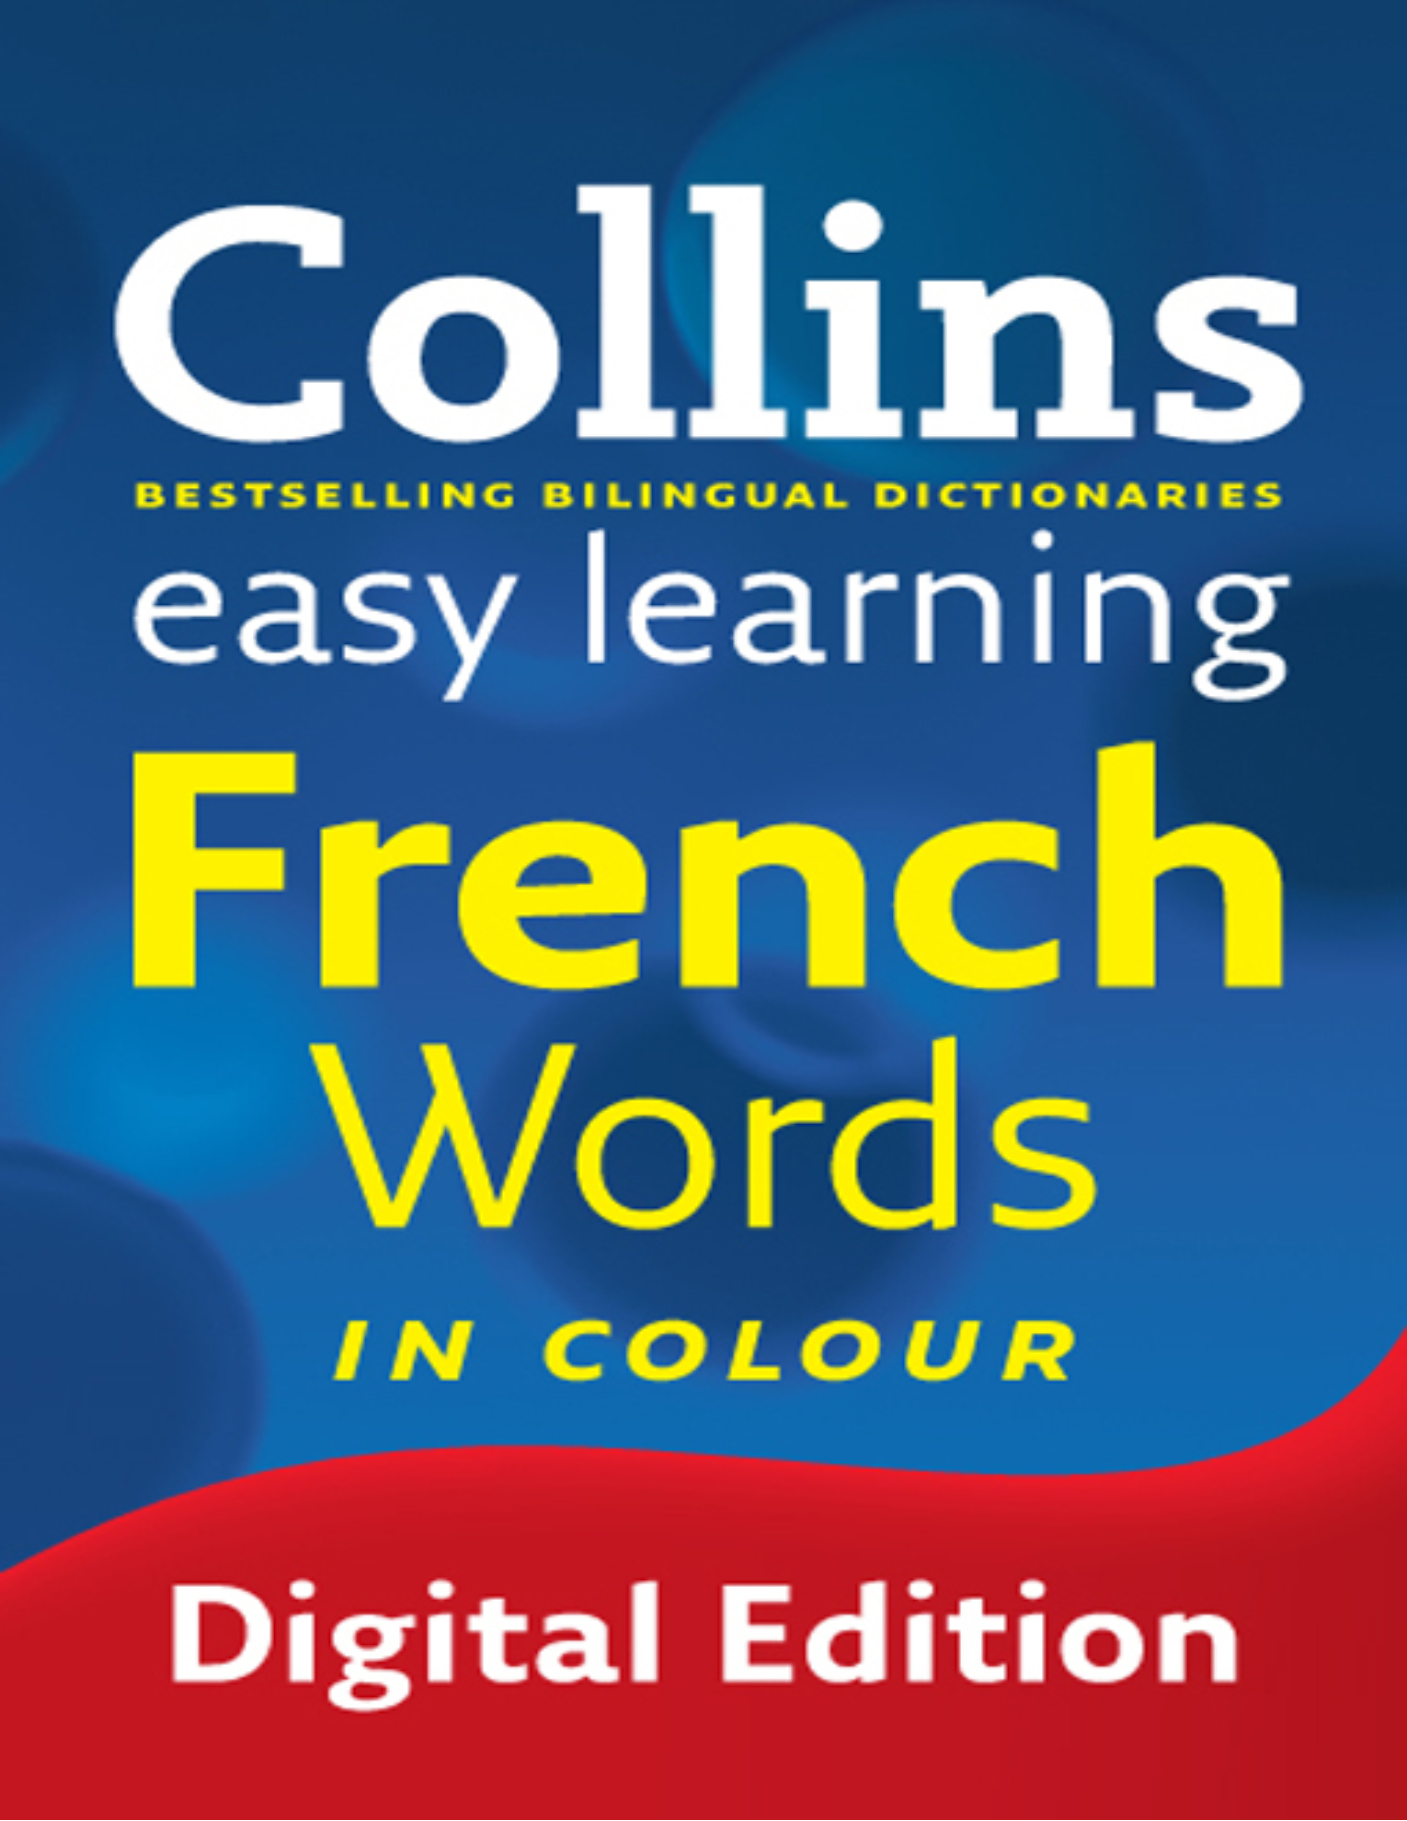 Rich results on Google's SERP when searching for ''Collins-Easy-Learning-French-Words''